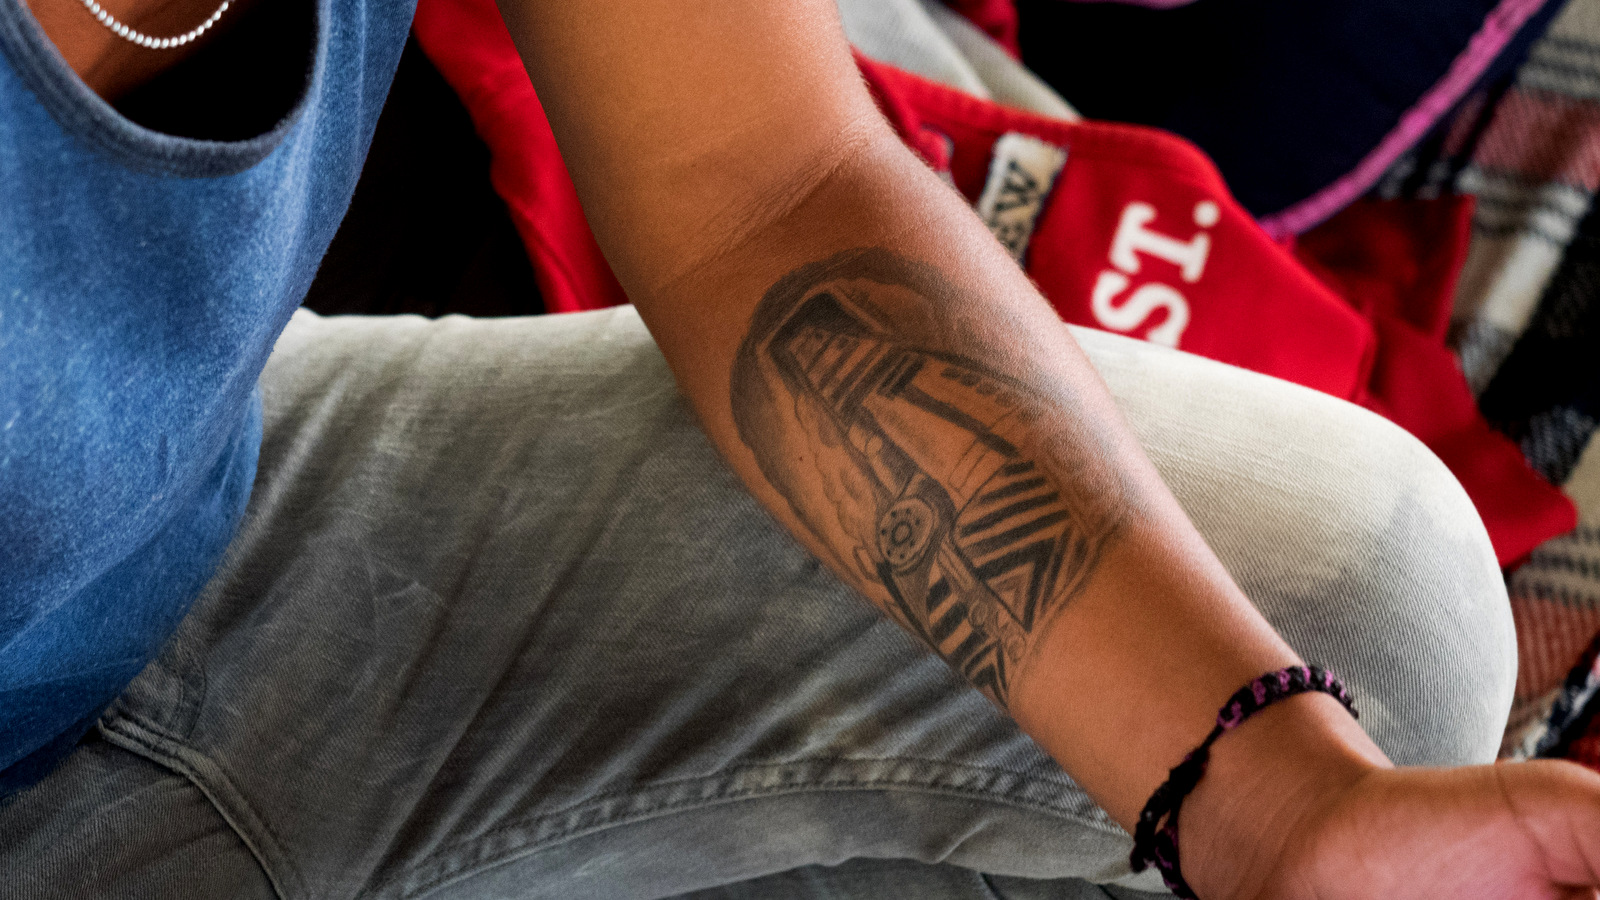 Israel Greñaldo's tattoo of La Bestia, the freight train many migrants ride through Mexico as part of their journey to the United States, Mexico City, April 10, 2018. (Photo: José Luis Granados Ceja)